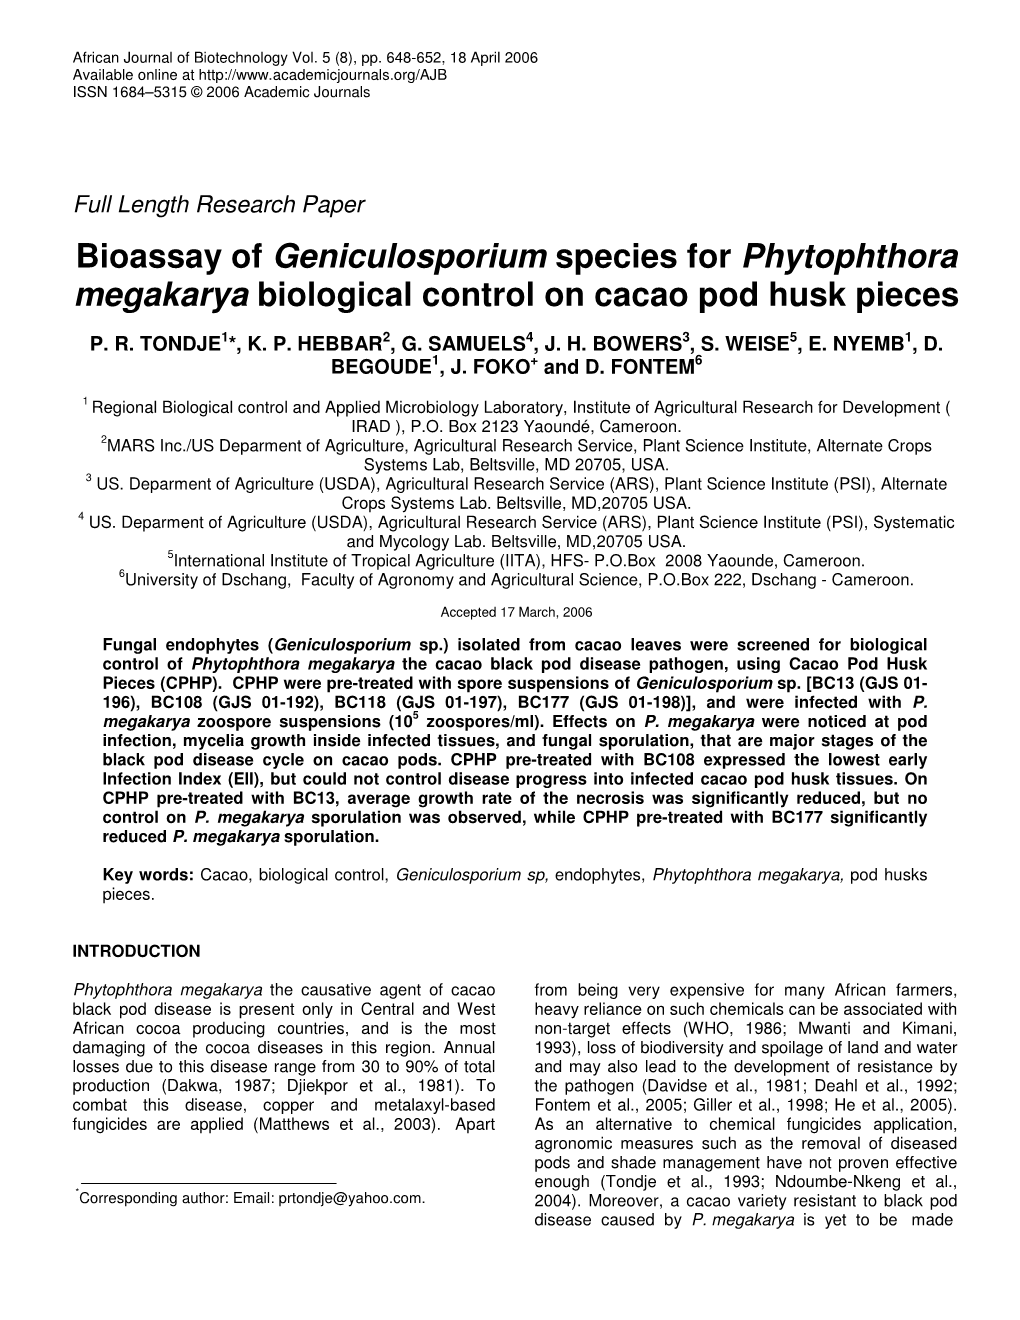 Bioassay of Geniculosporium Species for Phytophthora Megakarya Biological Control on Cacao Pod Husk Pieces